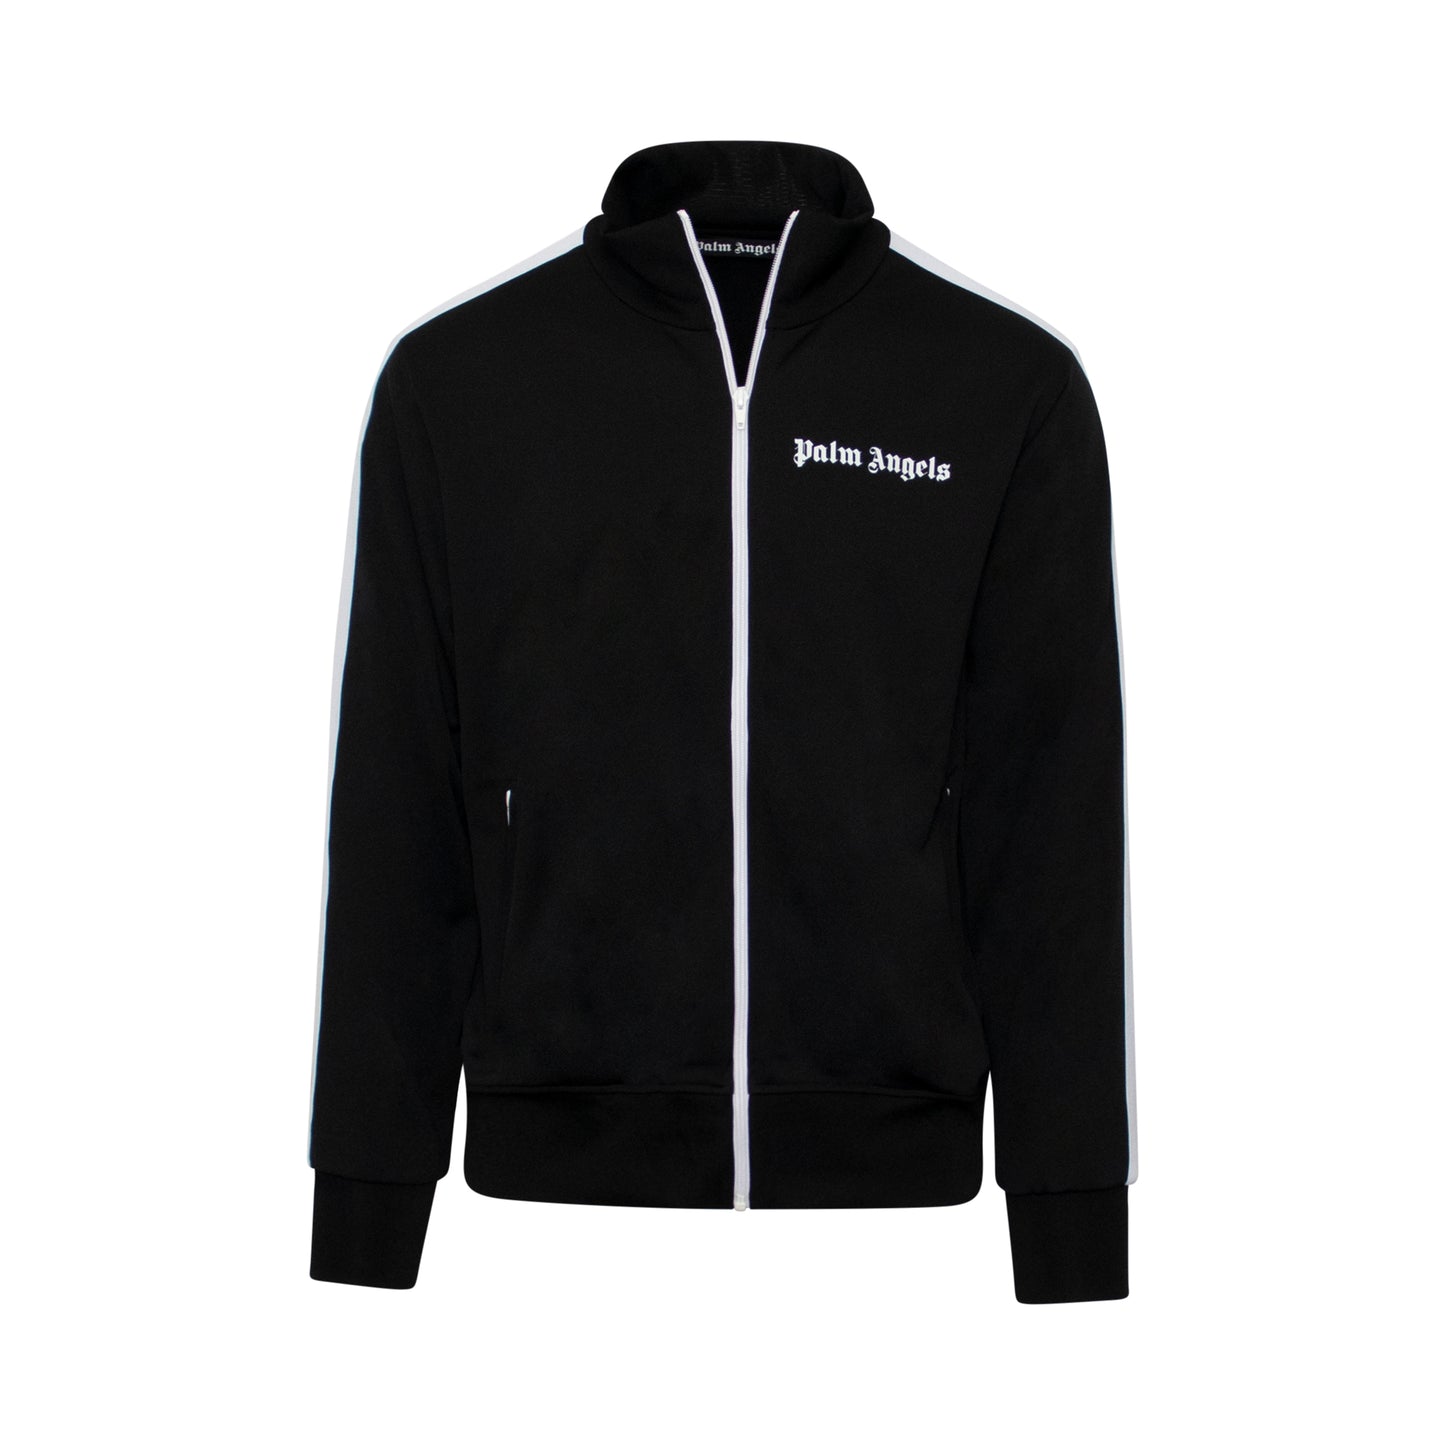 Classic Track Jacket in Black/White